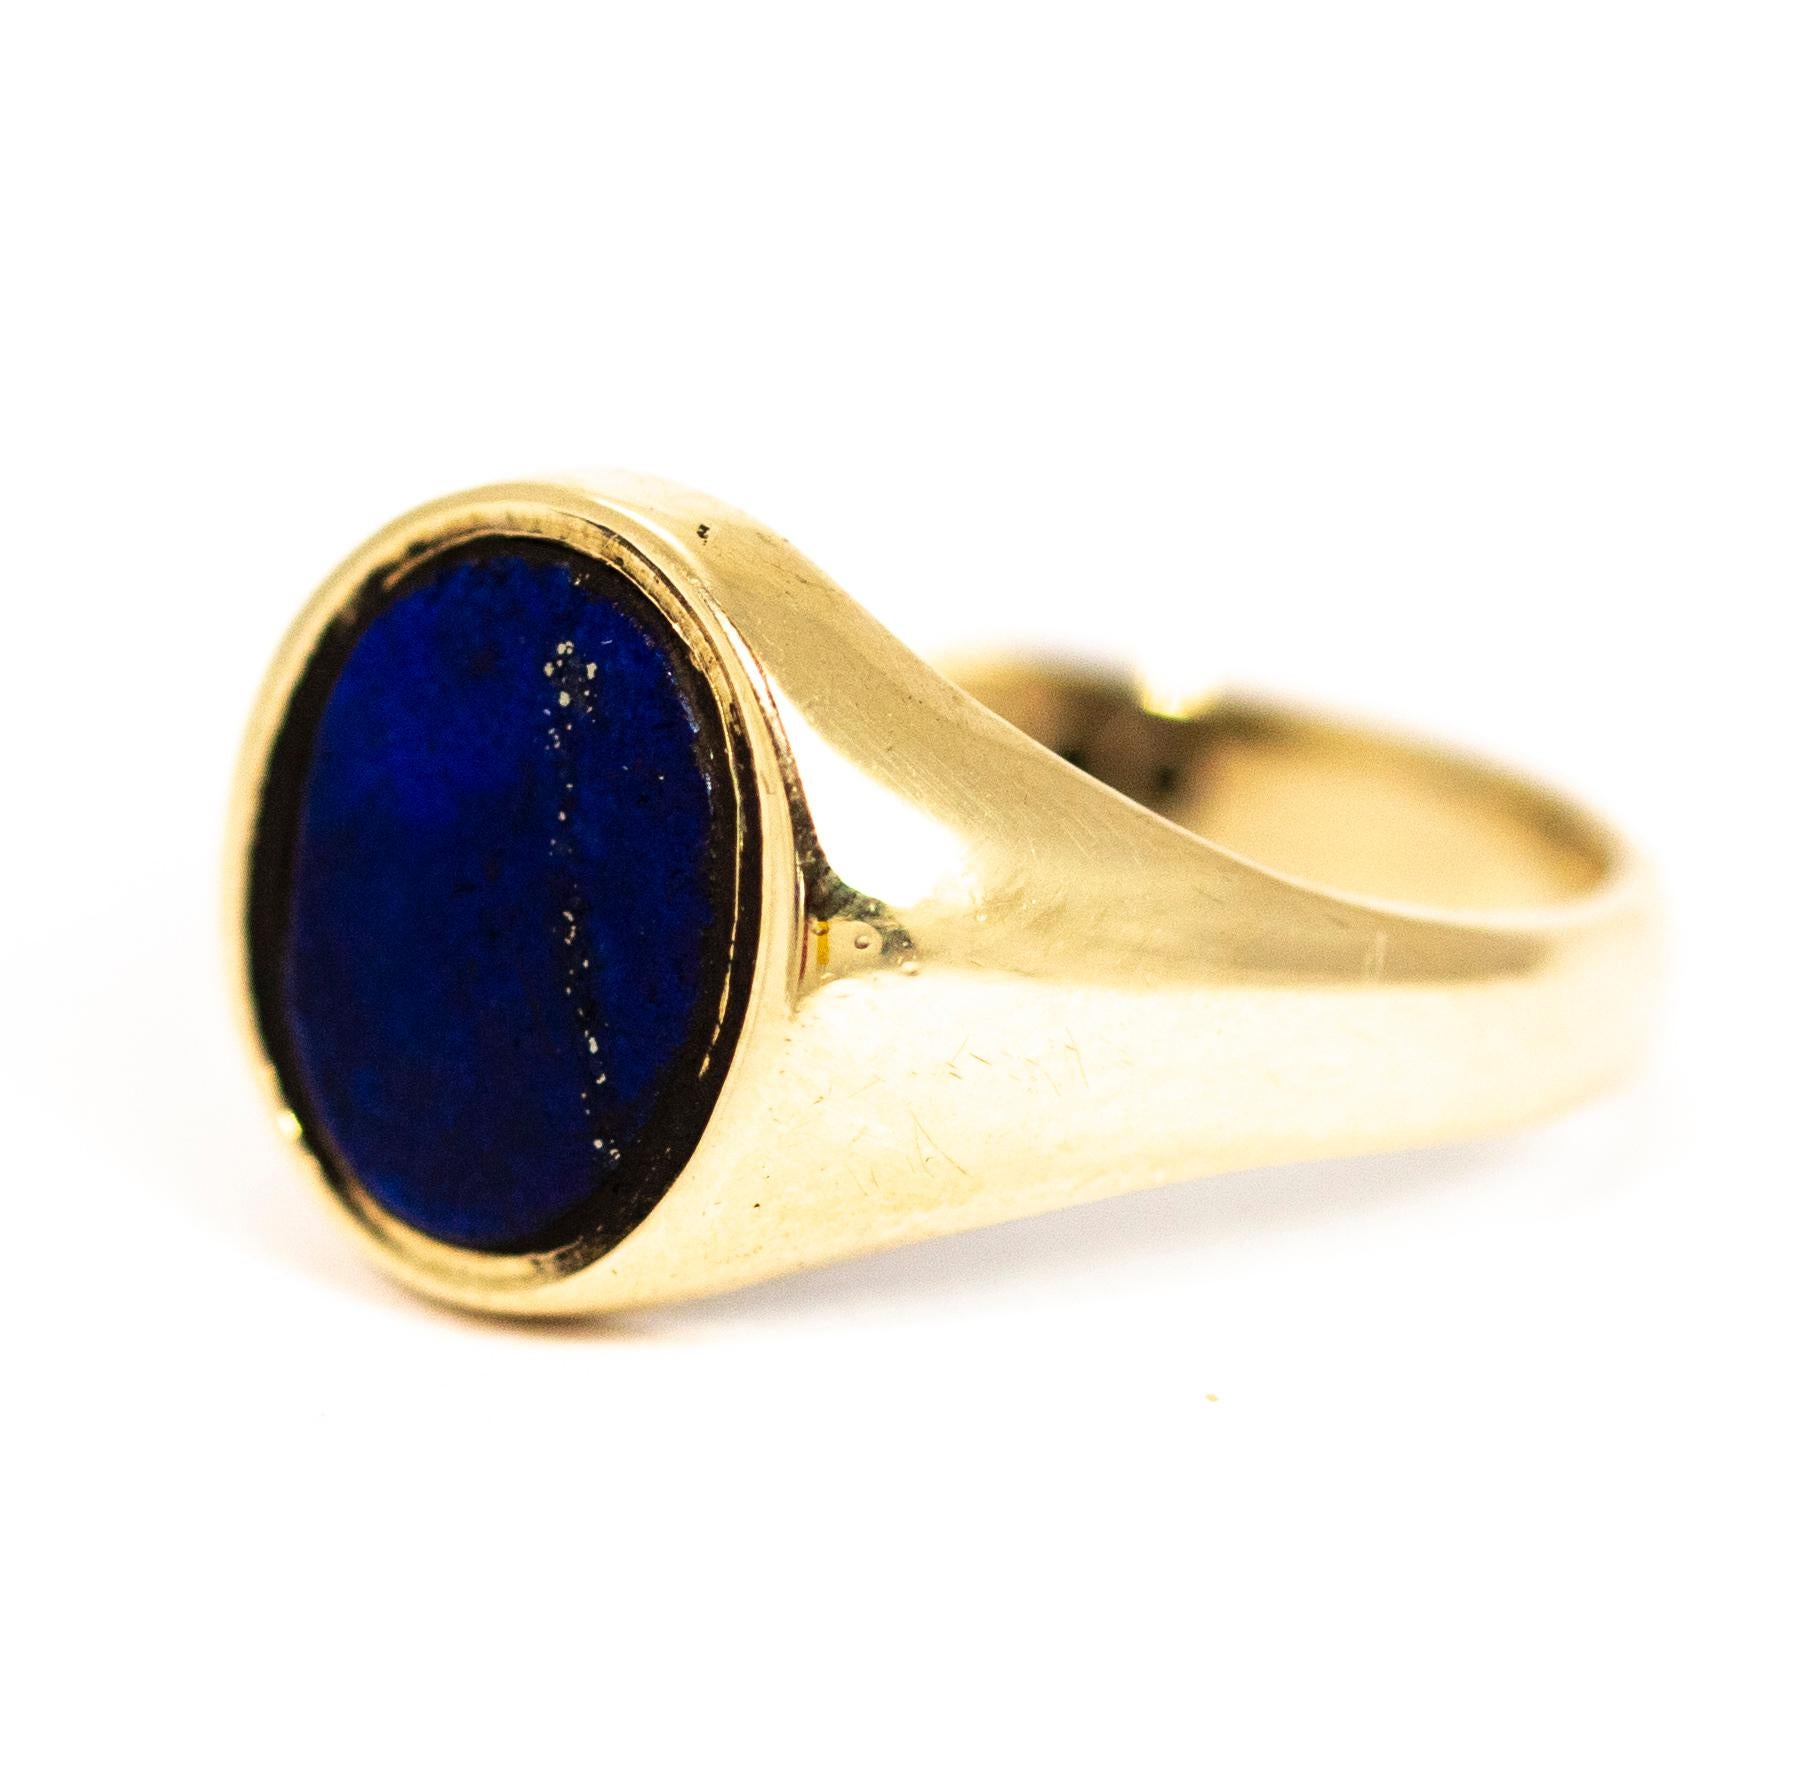 A superb vintage signet ring set with a flat cut oval lapis lazuli. The lapis has beautiful deep blue colouring with a strip of gold flecks. Modelled in 9 carat yellow gold
Fully hallmarked 1971 Birmigham, England.

Ring Size: UK N, US 7

Front